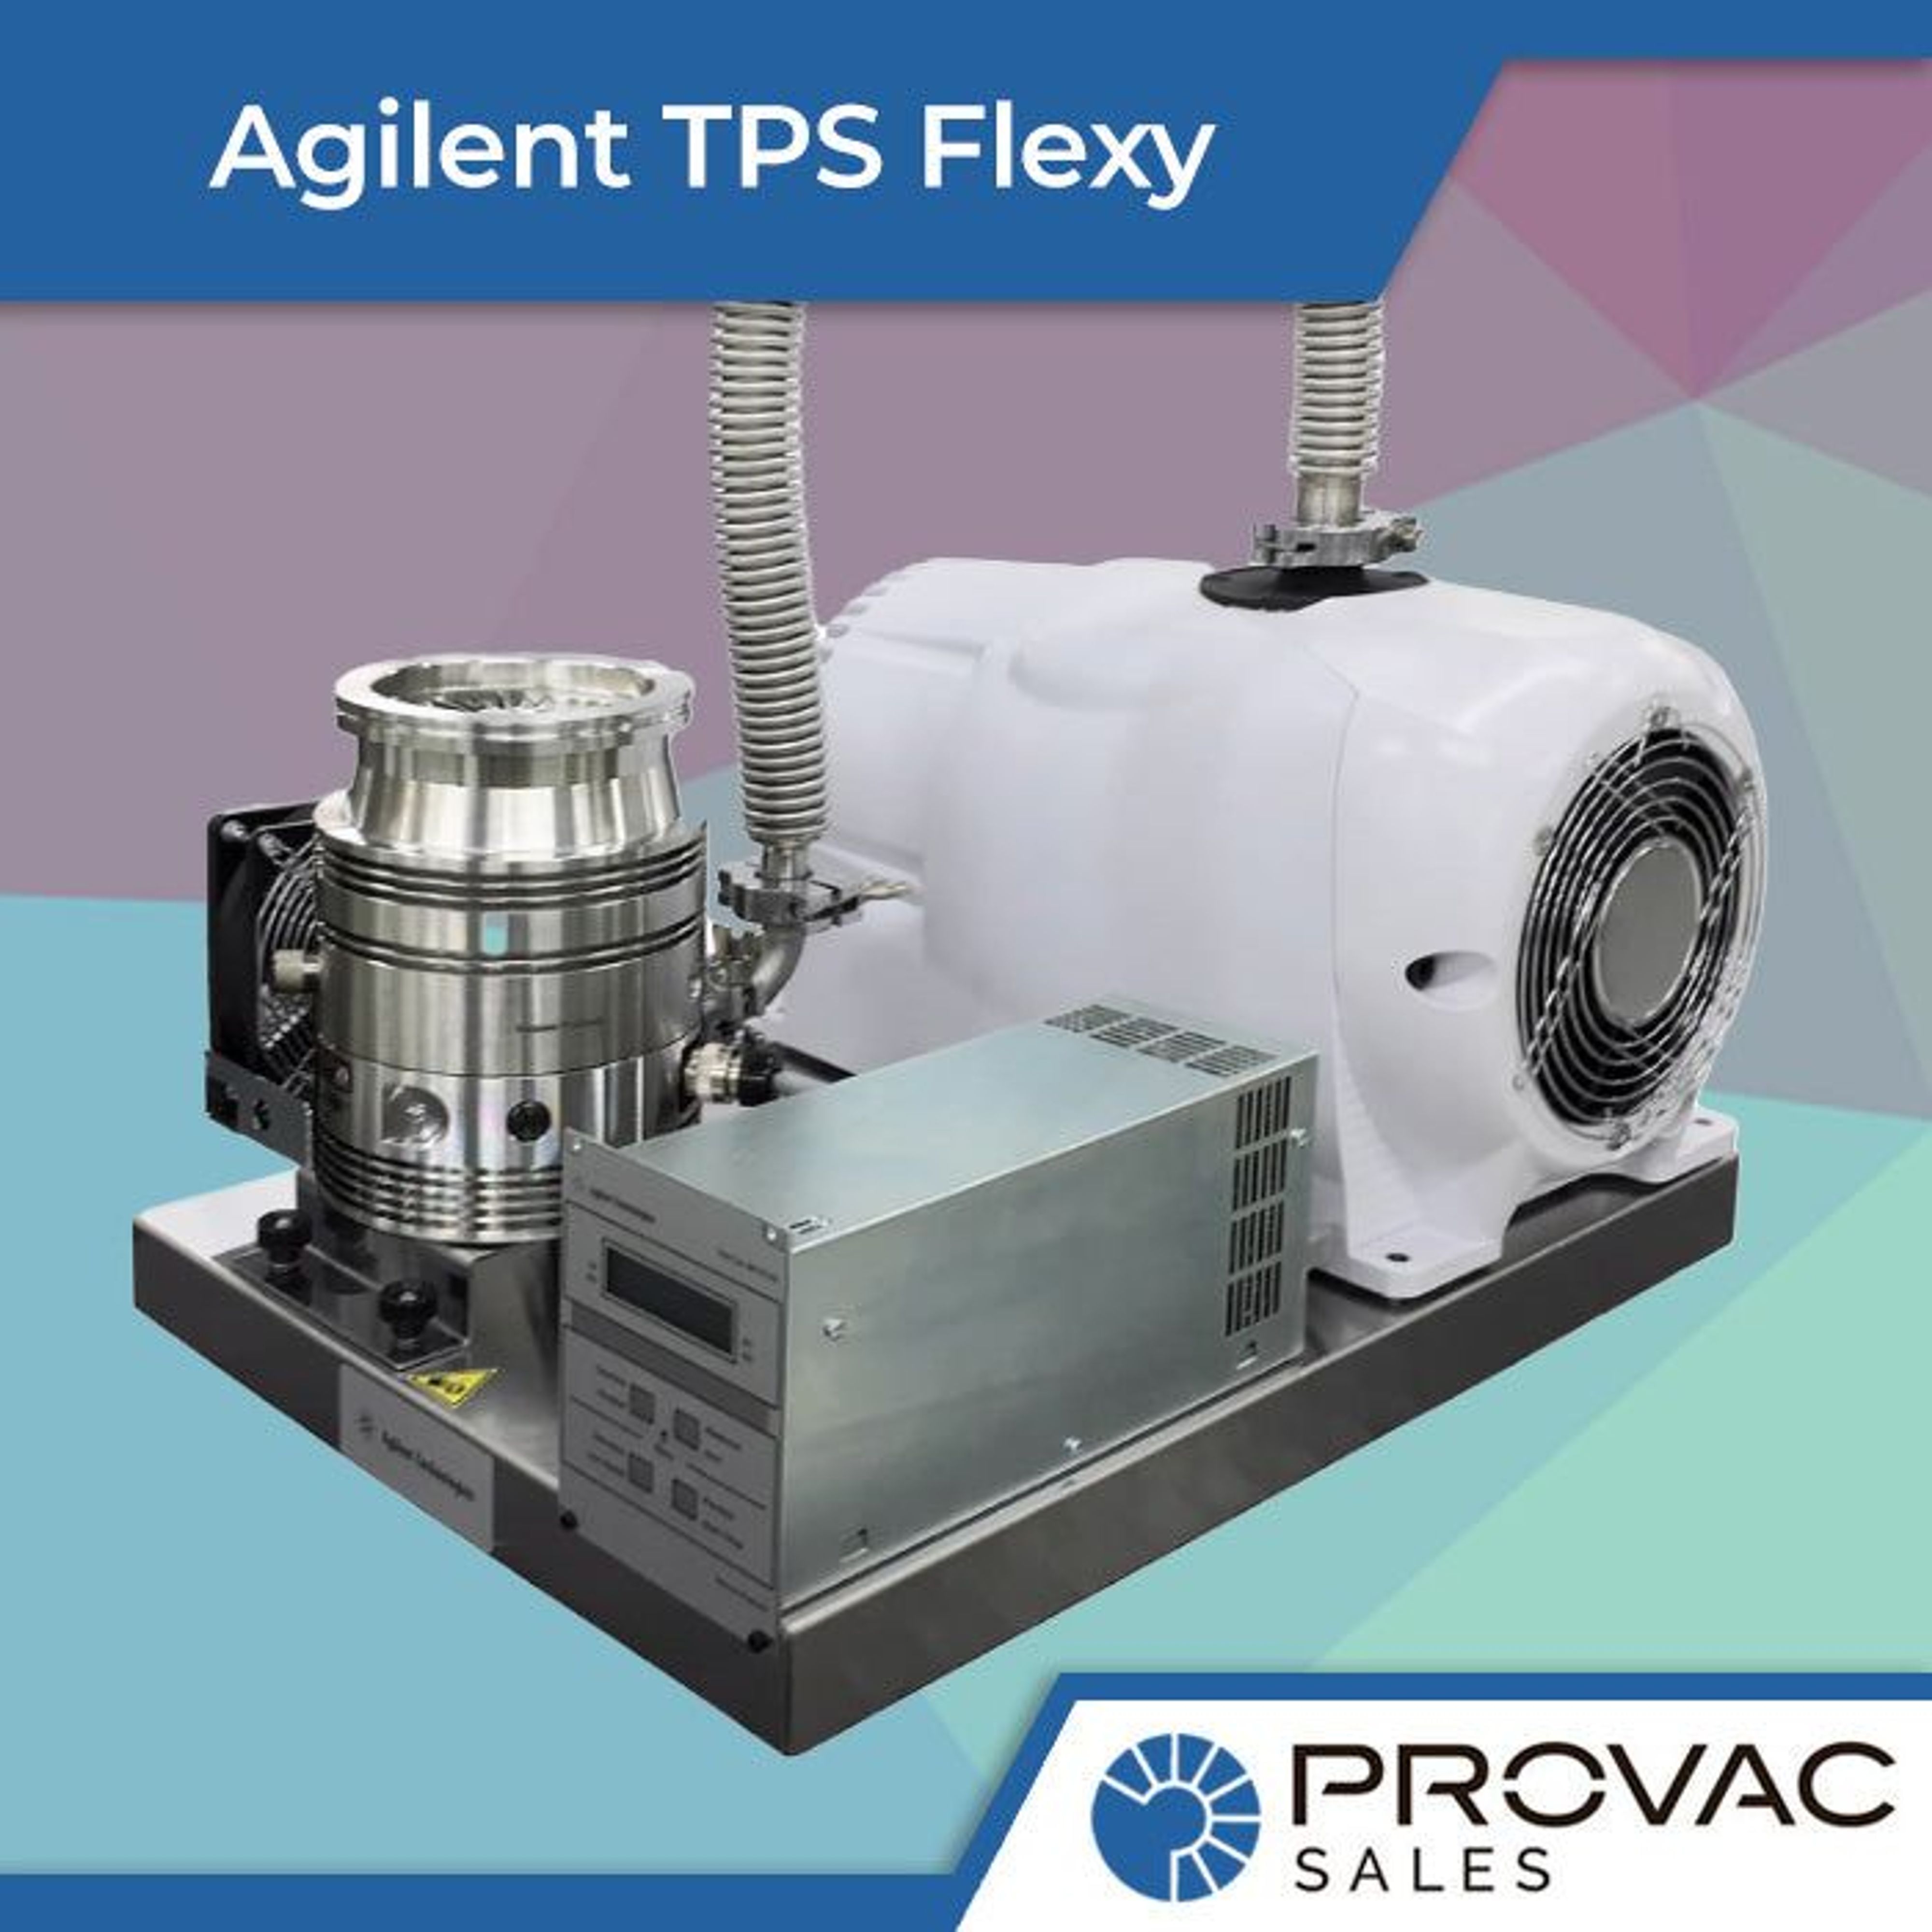 Agilent TPS Flexy Pumping Station with IDP-15 Background